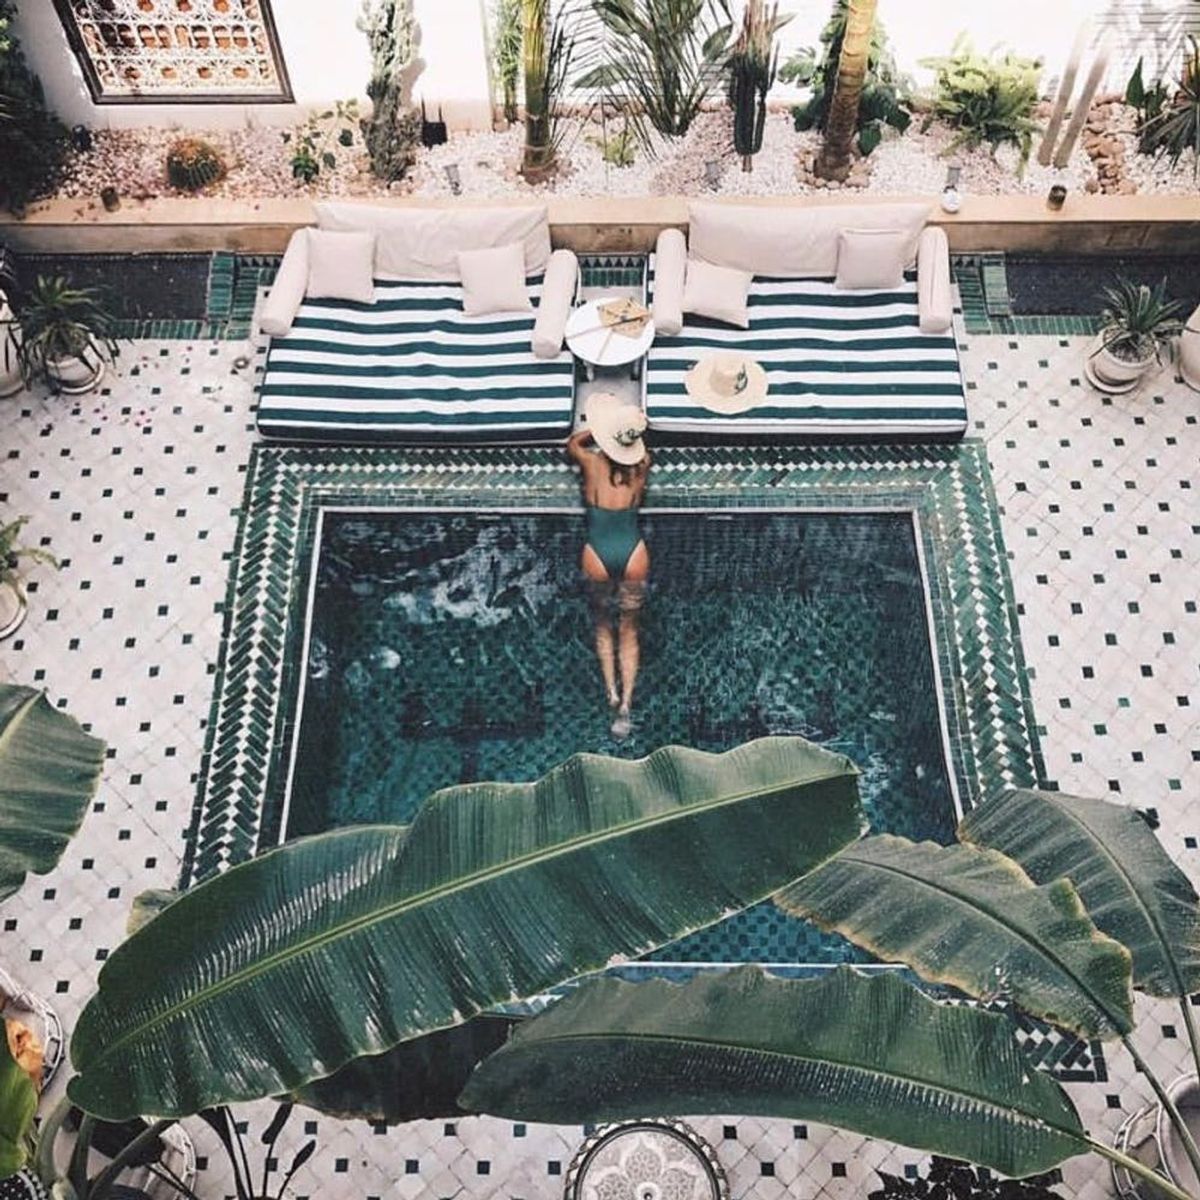 Why Everybody Is Finding Inspiration in Morocco (+ How to Go Yourself)